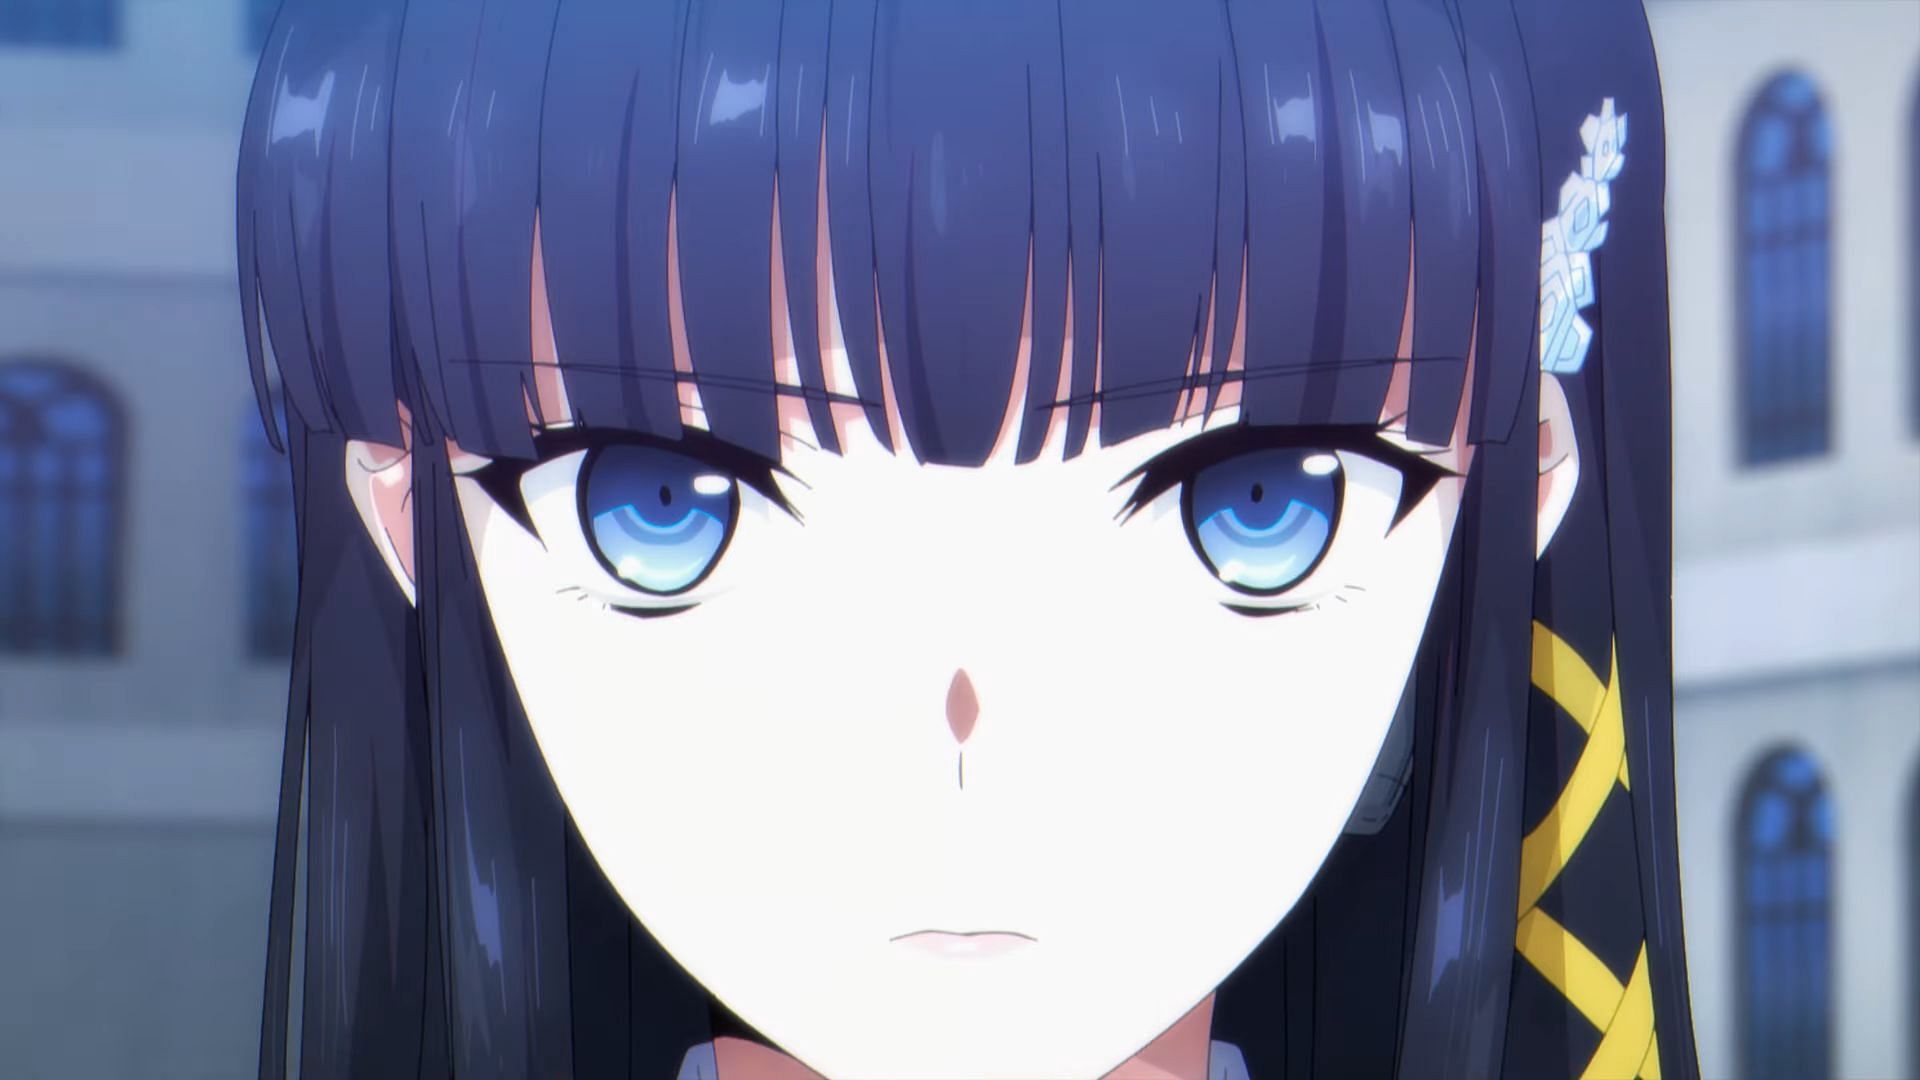 New The Irregular at Magic High School anime film confirms production with PV and more (Image via 8-bit Studios)